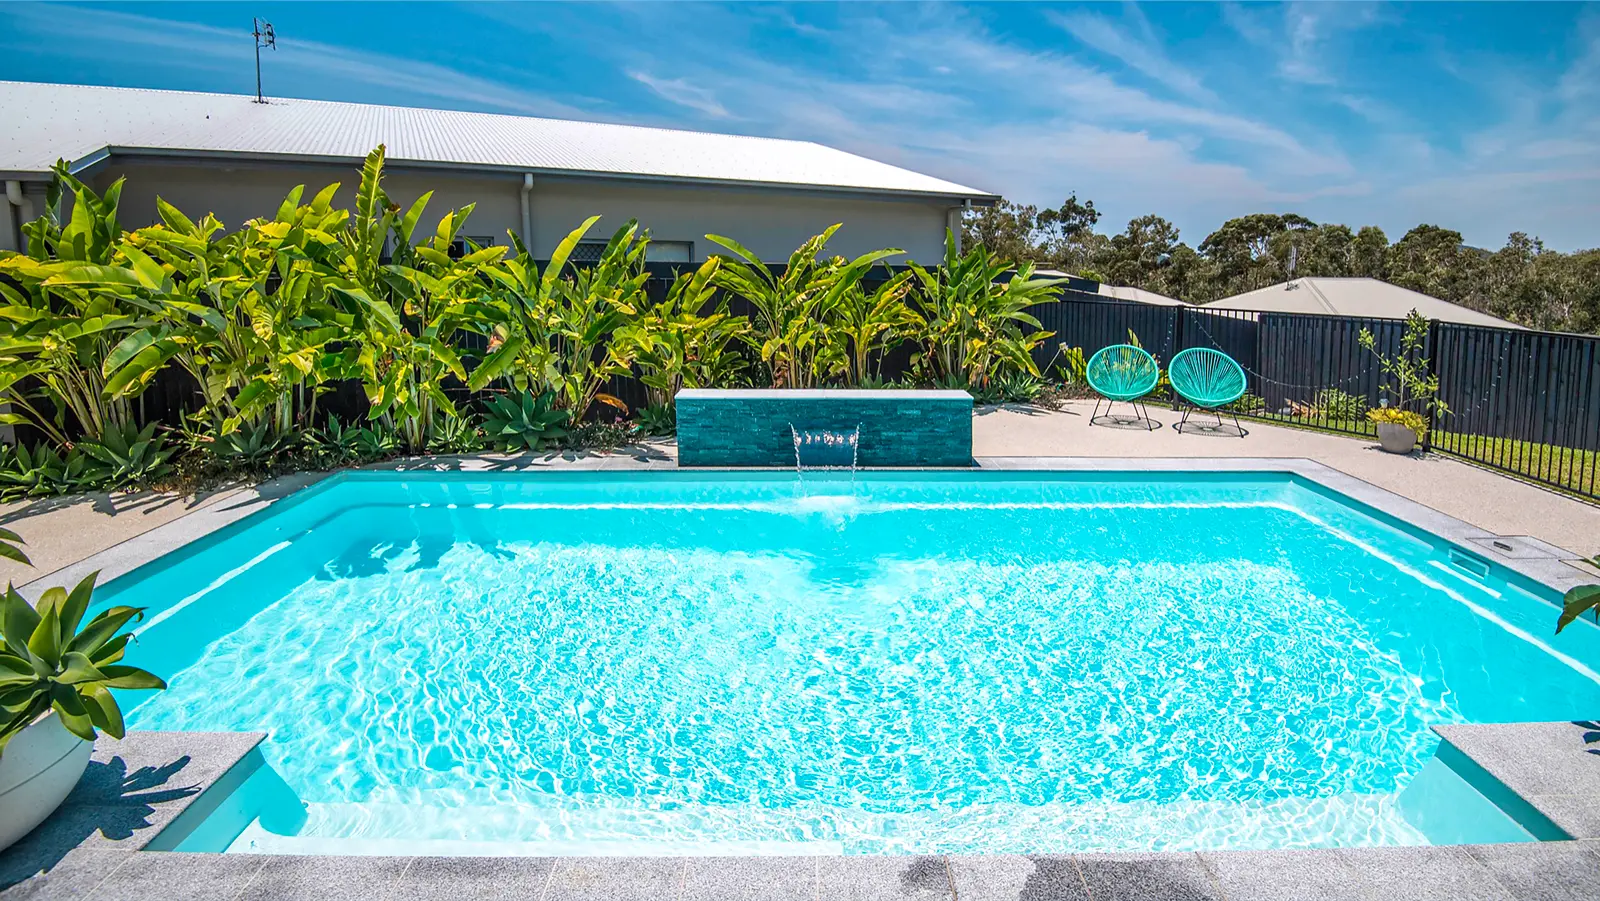 Paradise Pools offer a full palette of swimming pool colors 